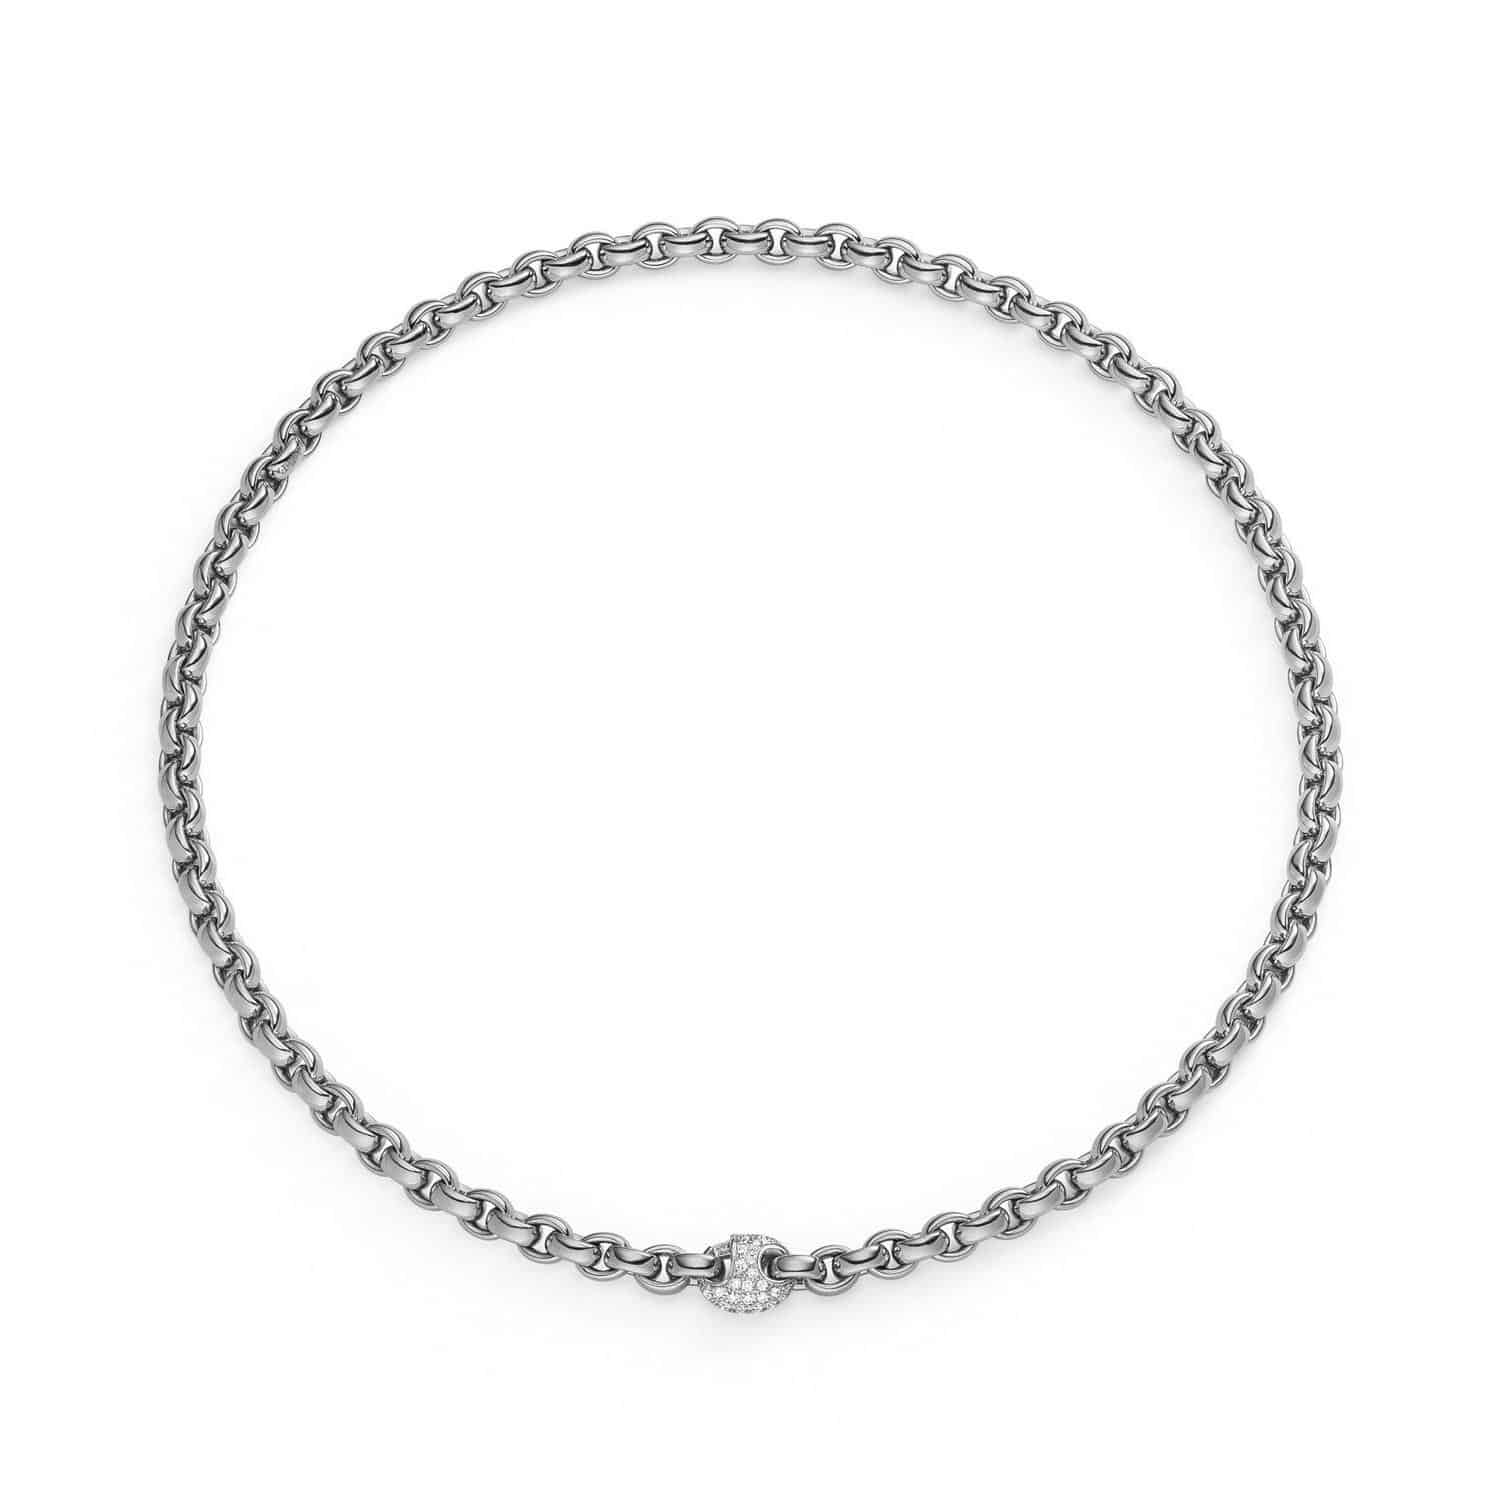 ISABELLE FA COLLIER "CHACHA 6" PAVÉCLASP - 04106-45BKHS-WG